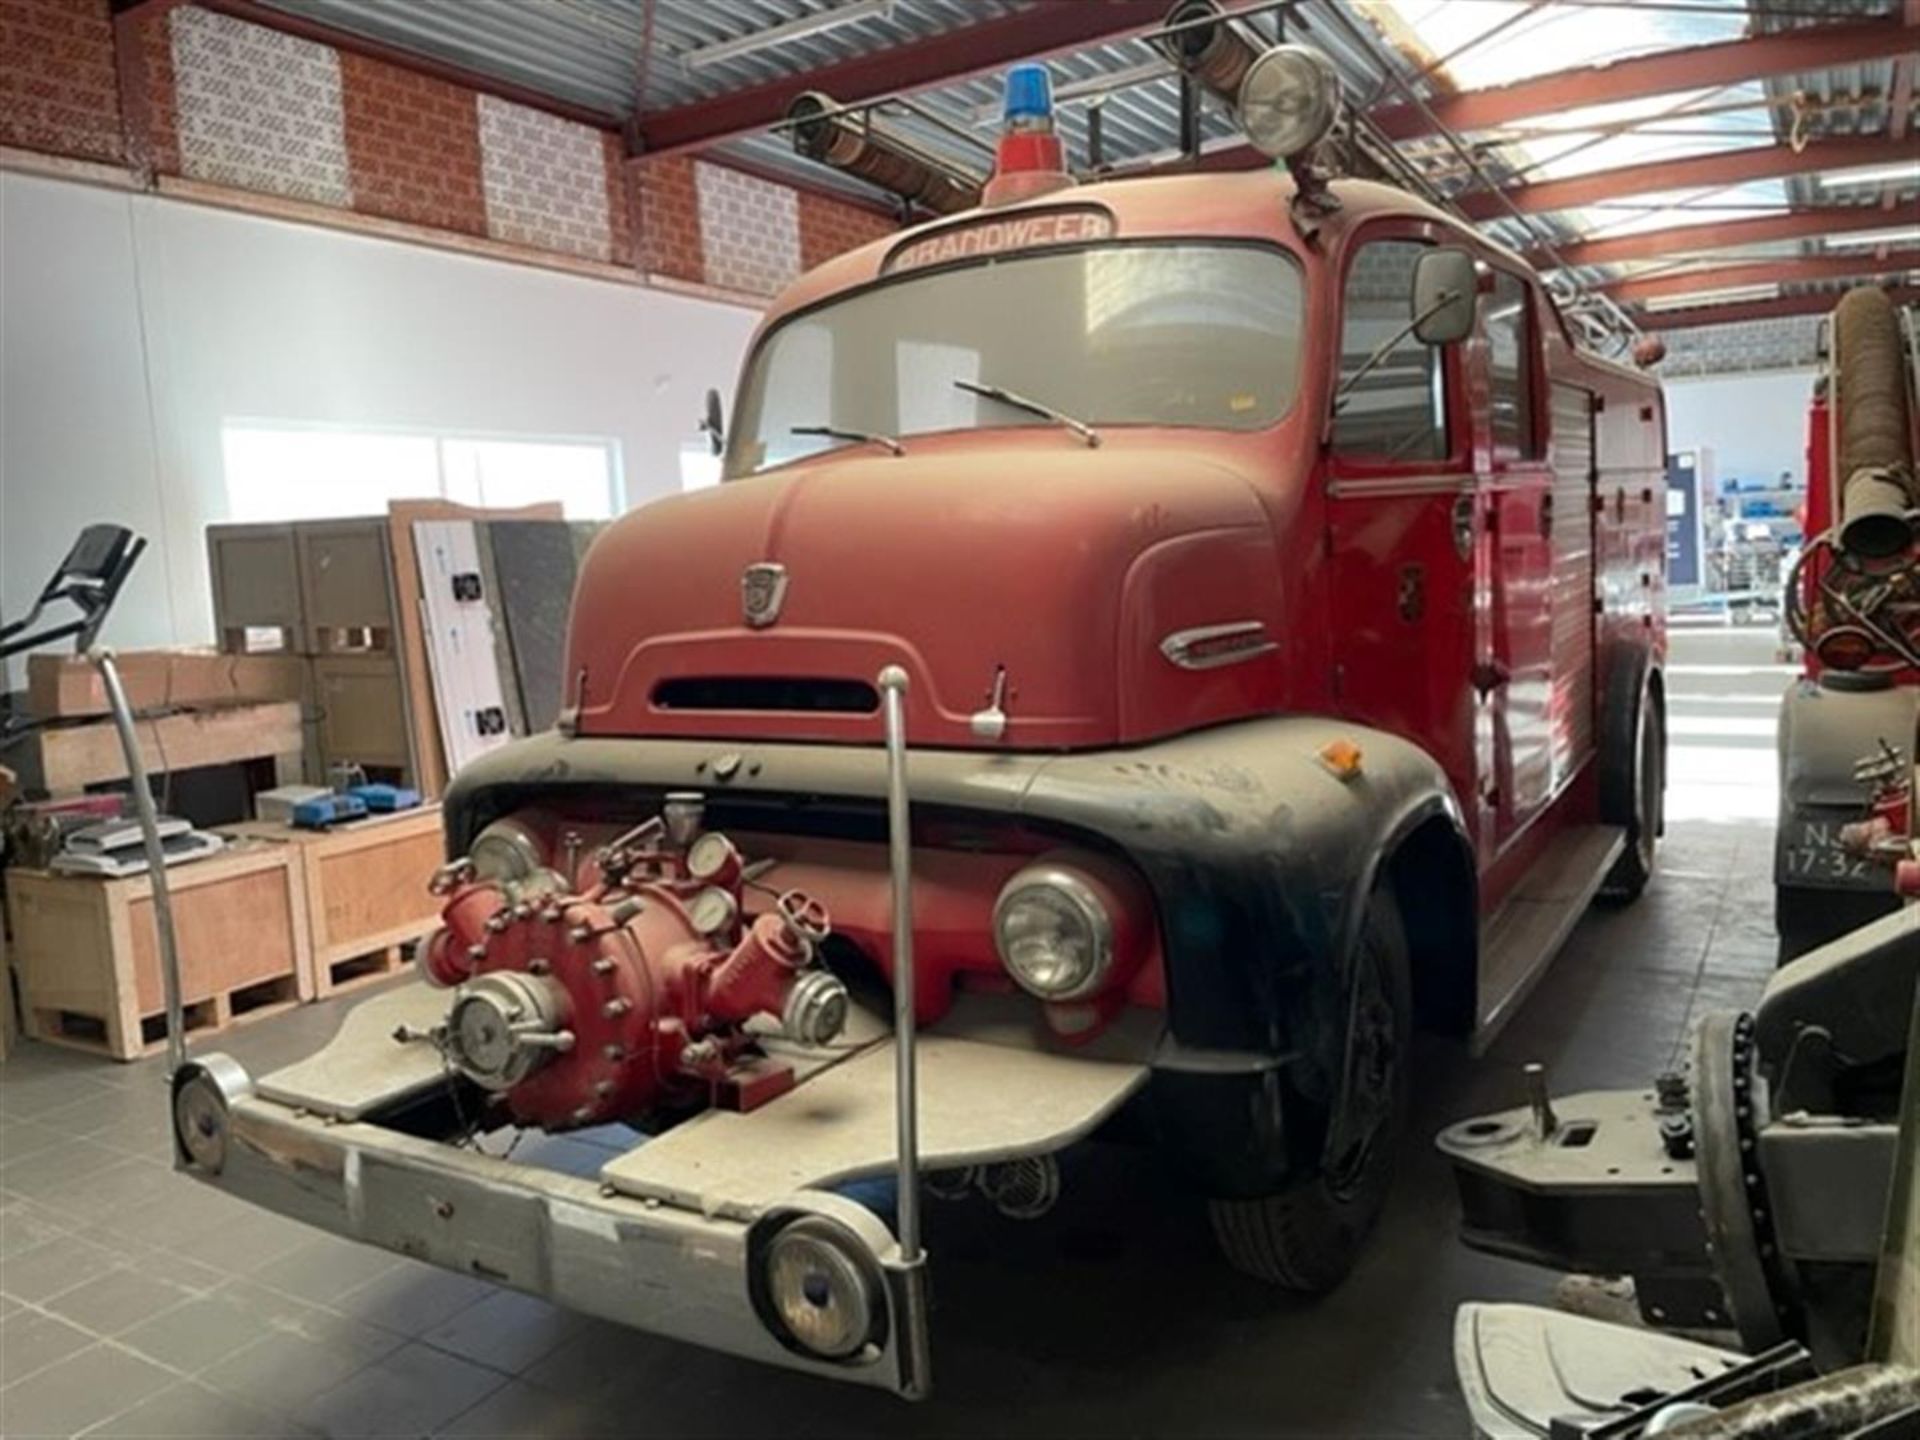 Old Timer fire truck - Image 15 of 24